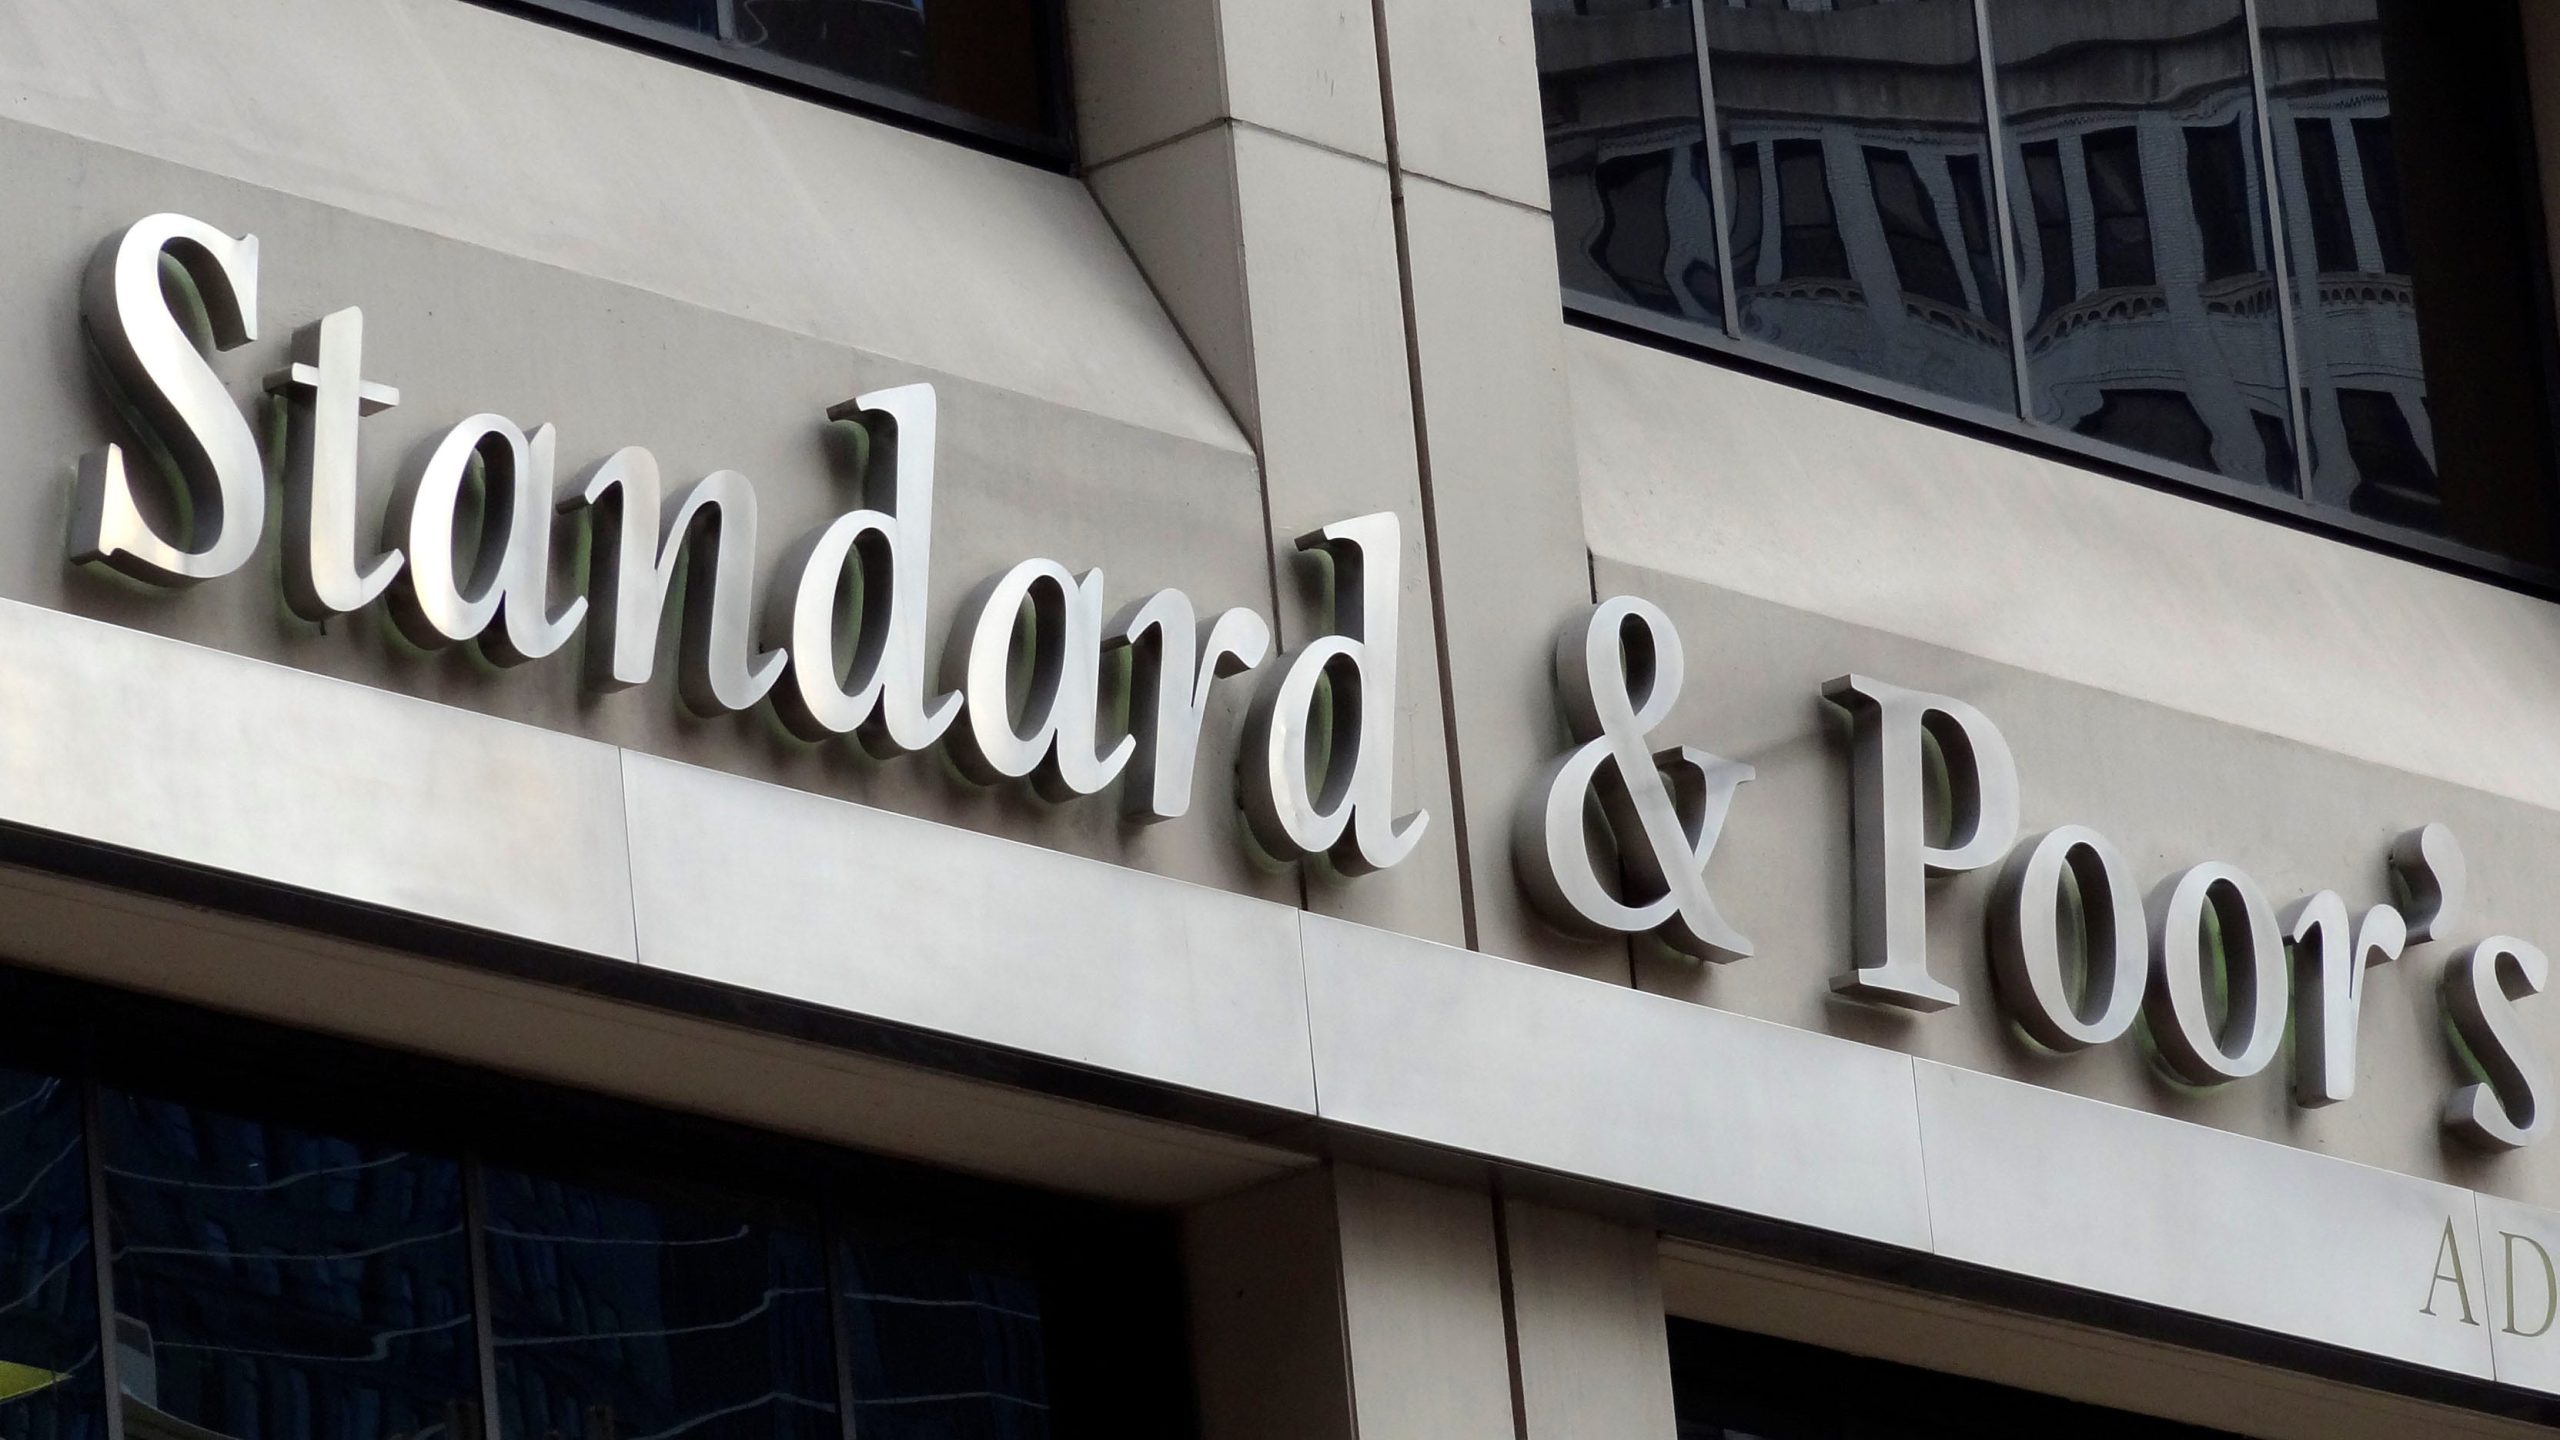 Standard & Poor’s downgrades Russia’s rating to junk, Moody’s issues spam warning